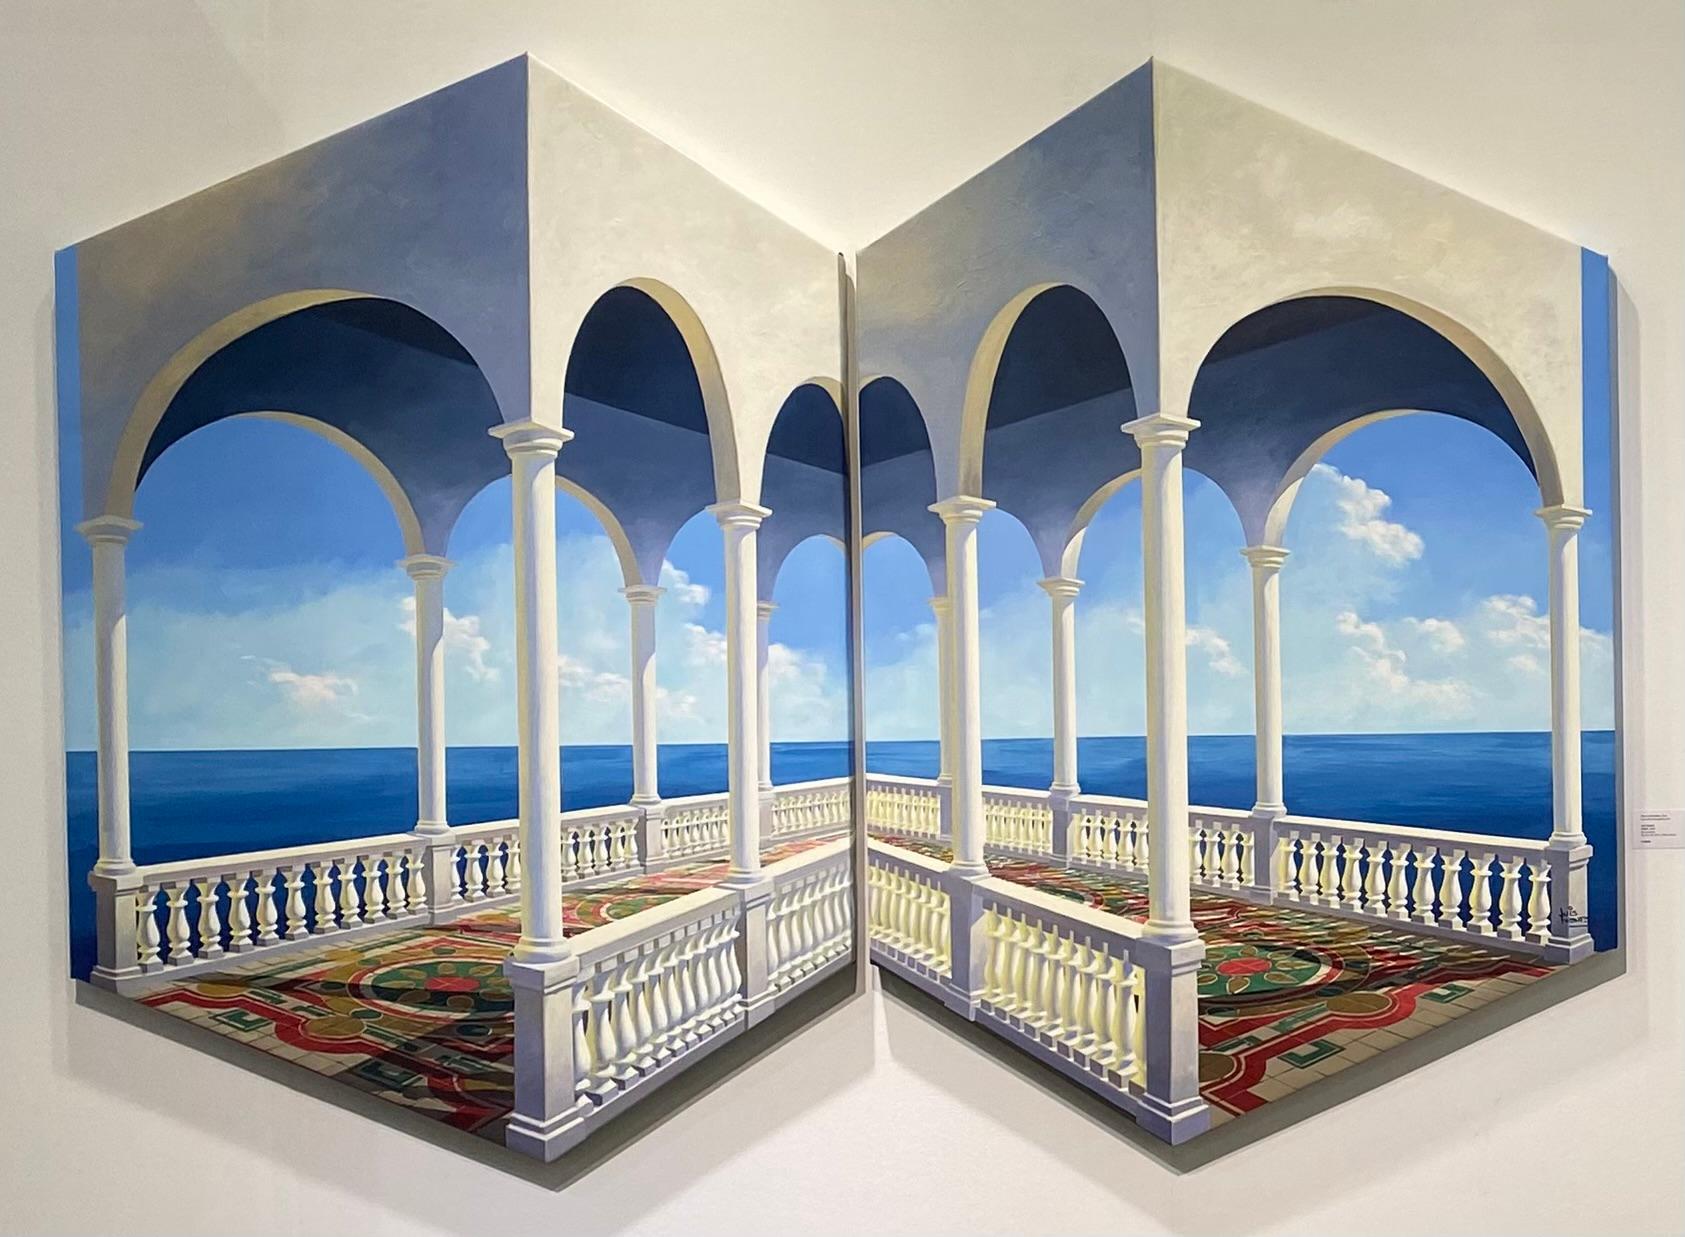 ARCHES ( diptych) - original modern realism seascape oil painting- surreal art